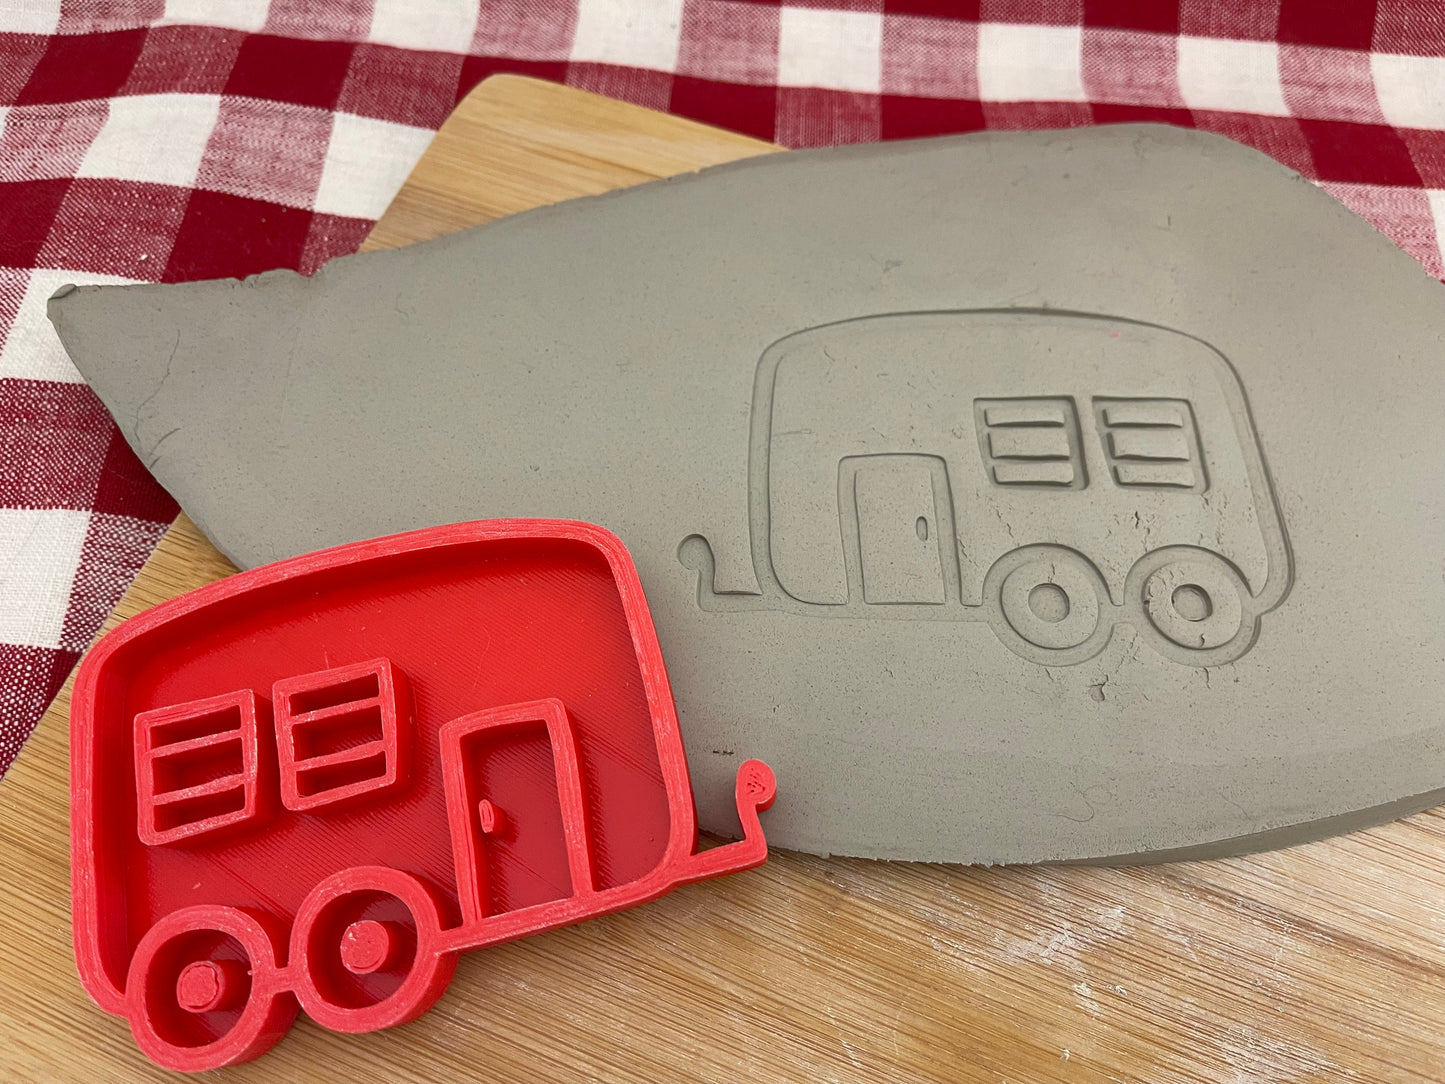 Pottery Stamp, Camper design, Camping doodle series, Clay, Pottery Tool, plastic 3d printed, multiple sizes available